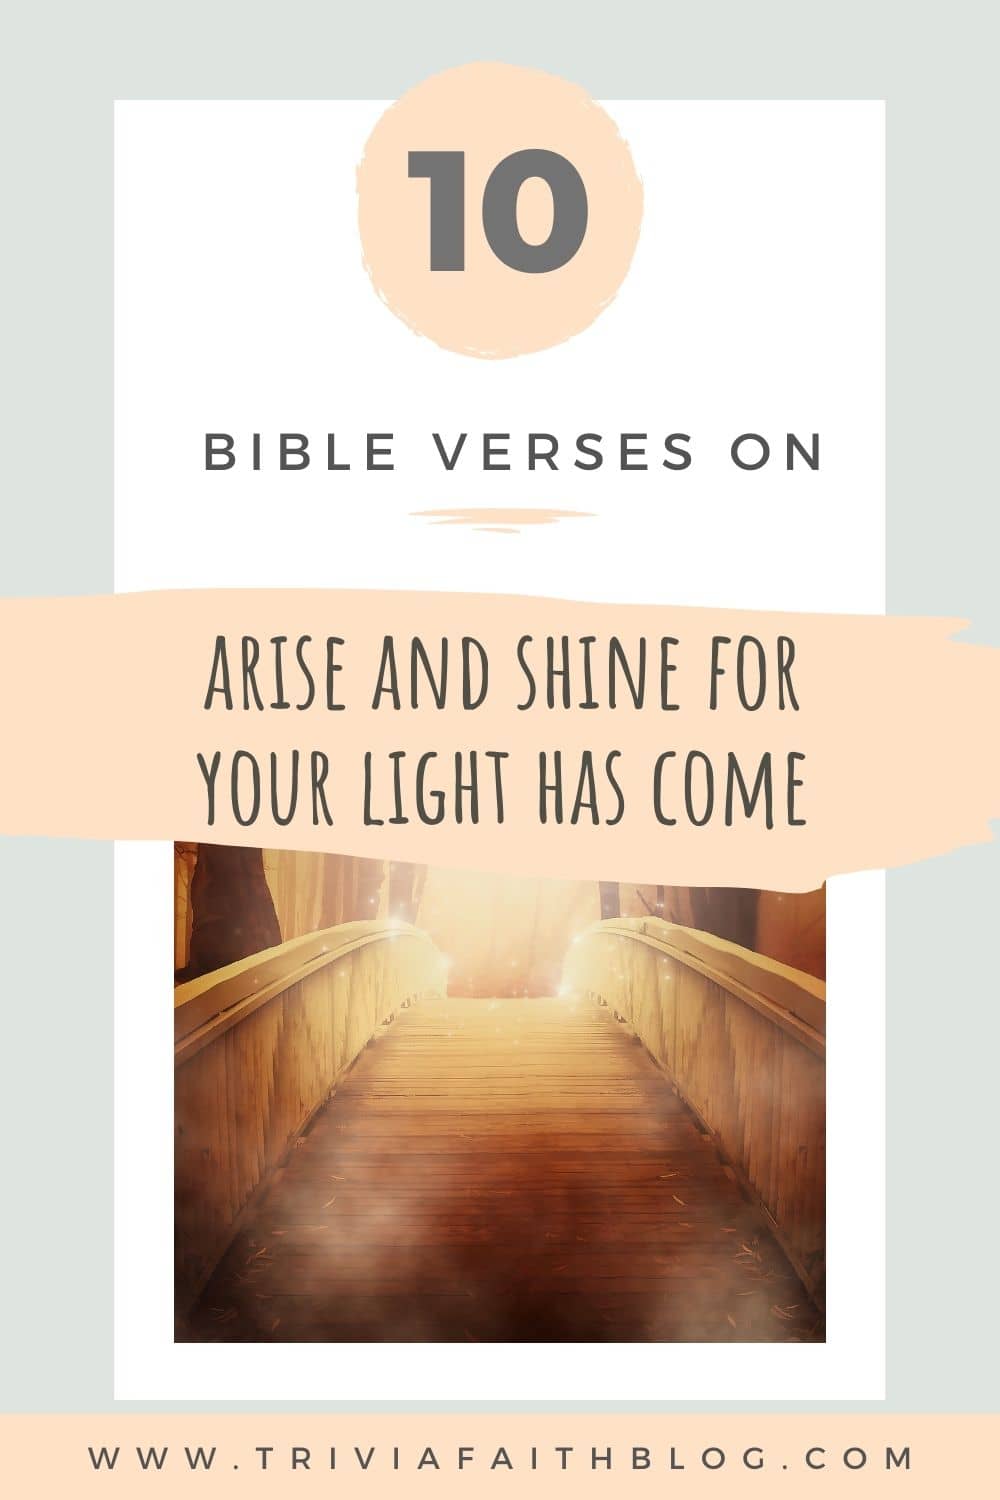 Arise and Shine For Your Light Has Come bible verses